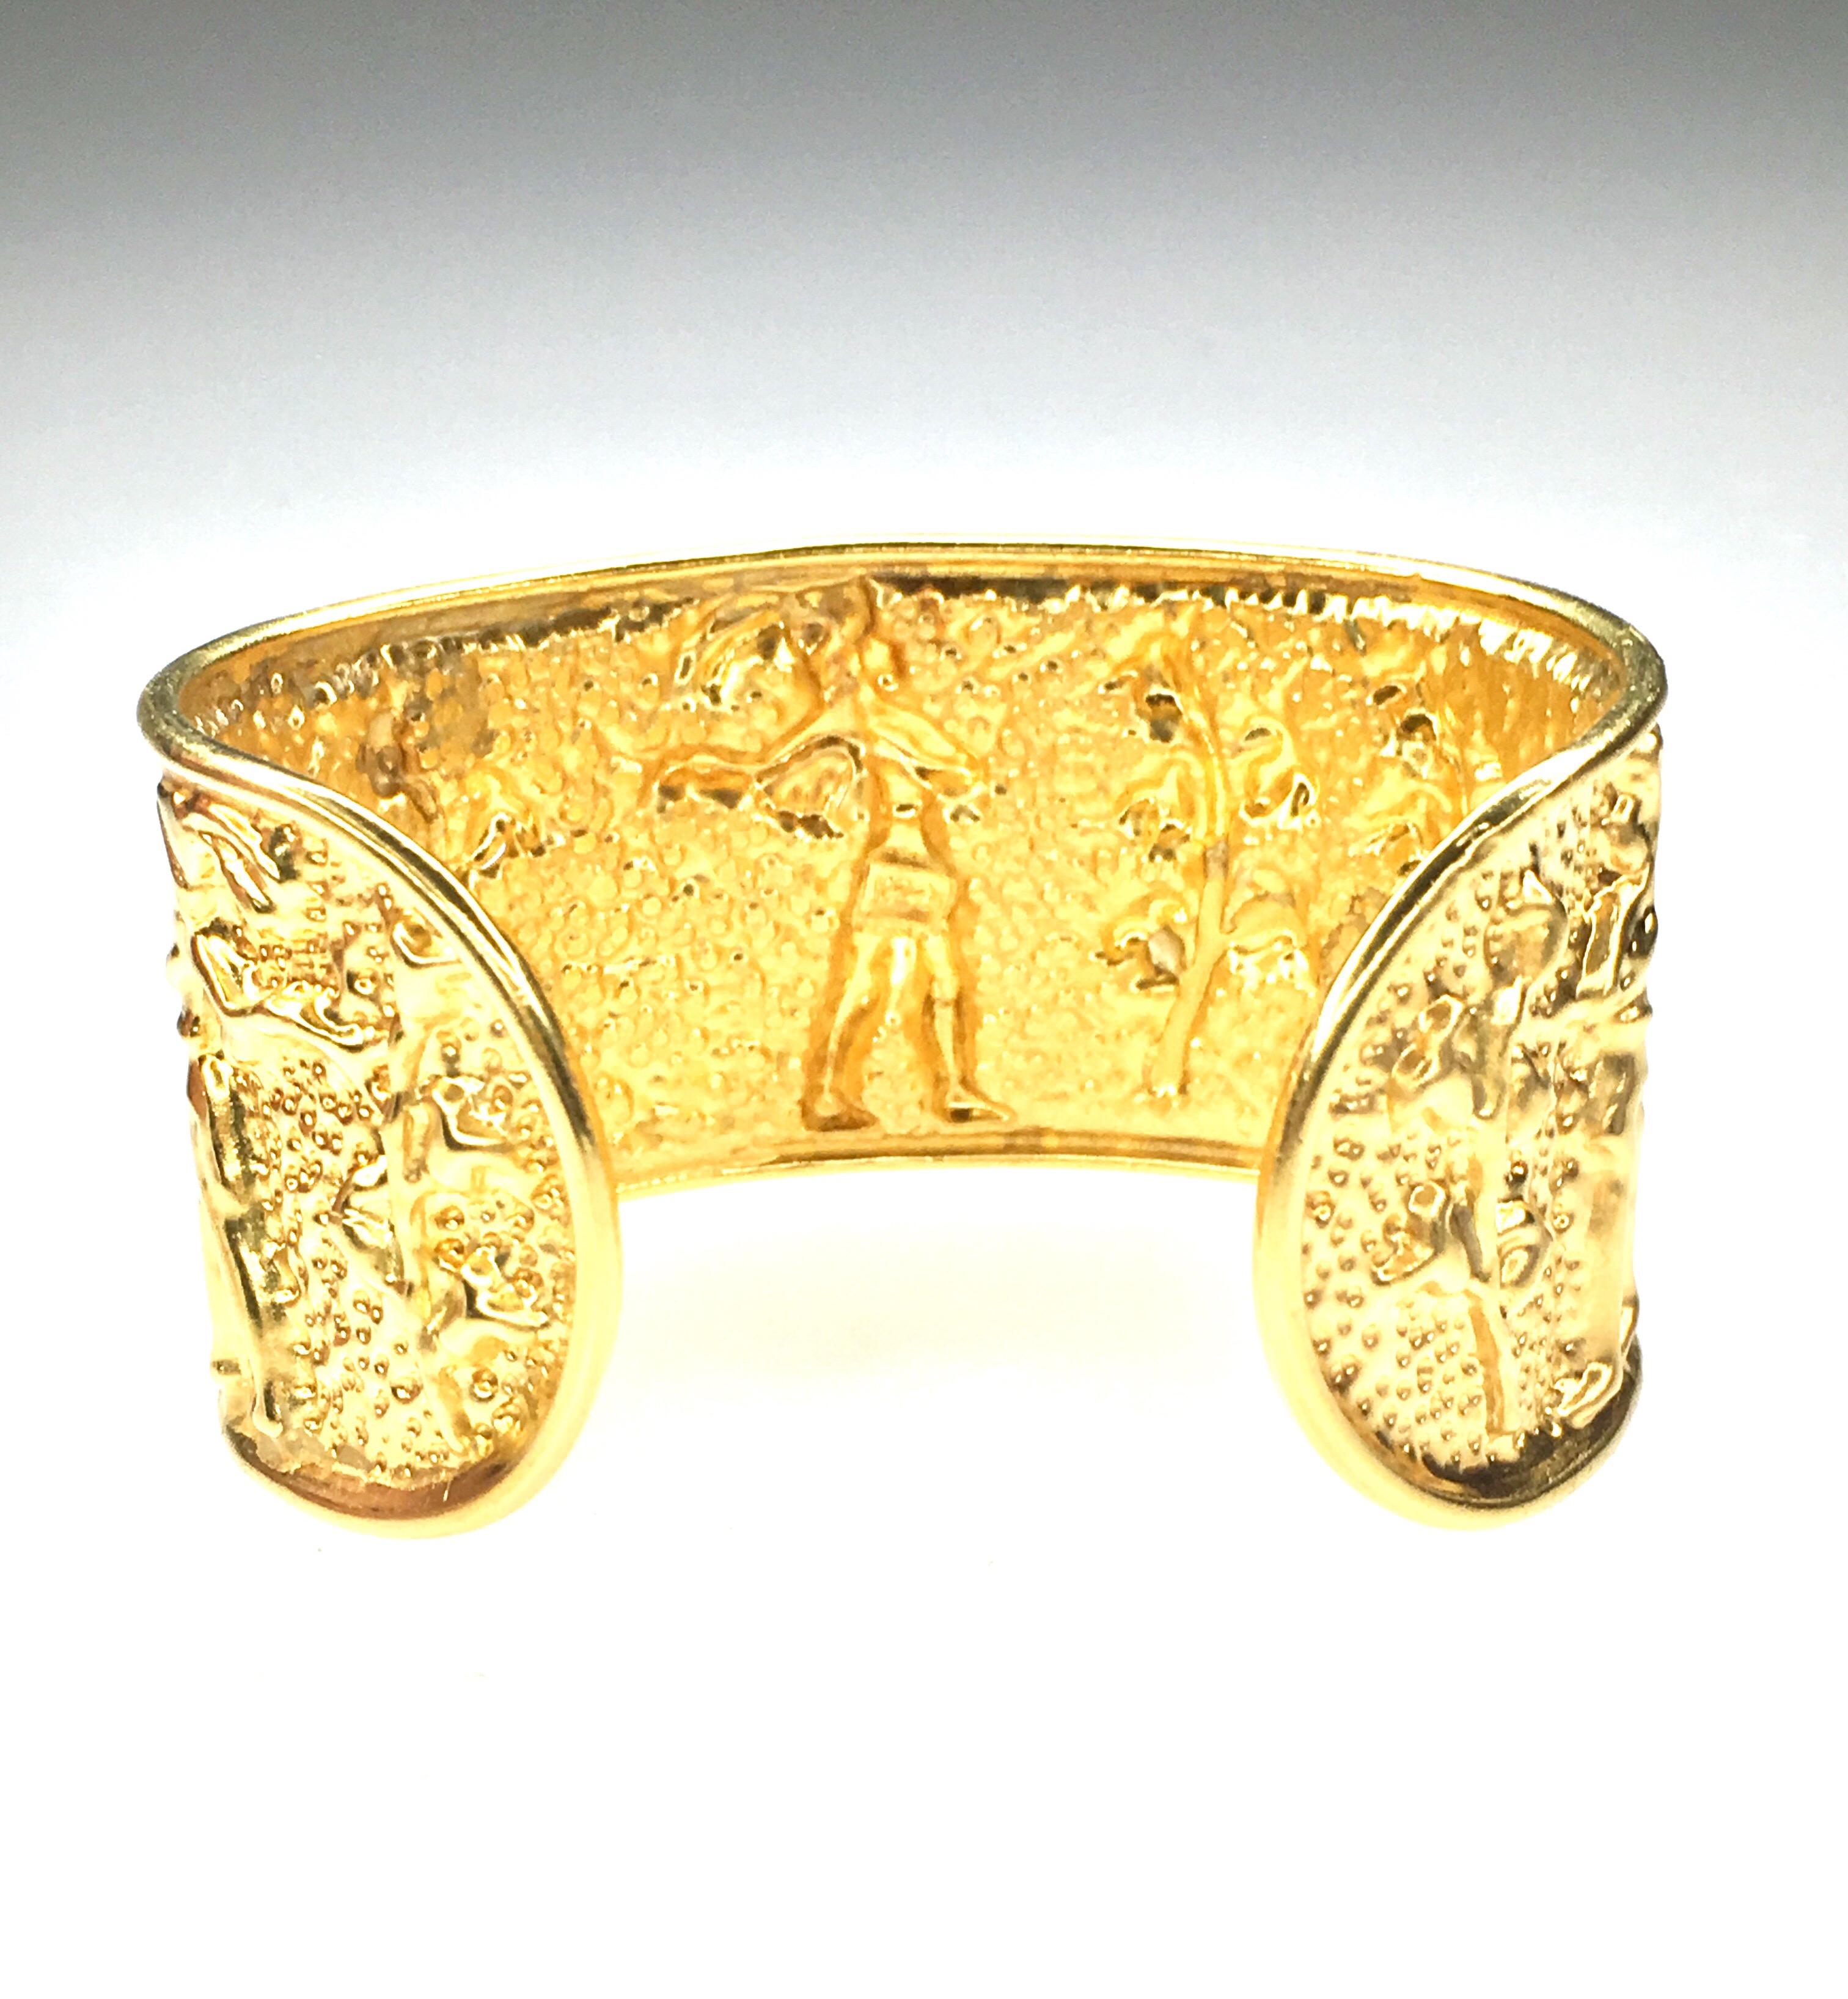 GEMOLITHOS yellow Gold 22K cuff-bracelet, The Prince of Knossos, Crete, 1970´s-1980´s weight is 41,1grs  22K, height 35mm and wide 65mm  it can easily takes the form of the arm since is 22k.